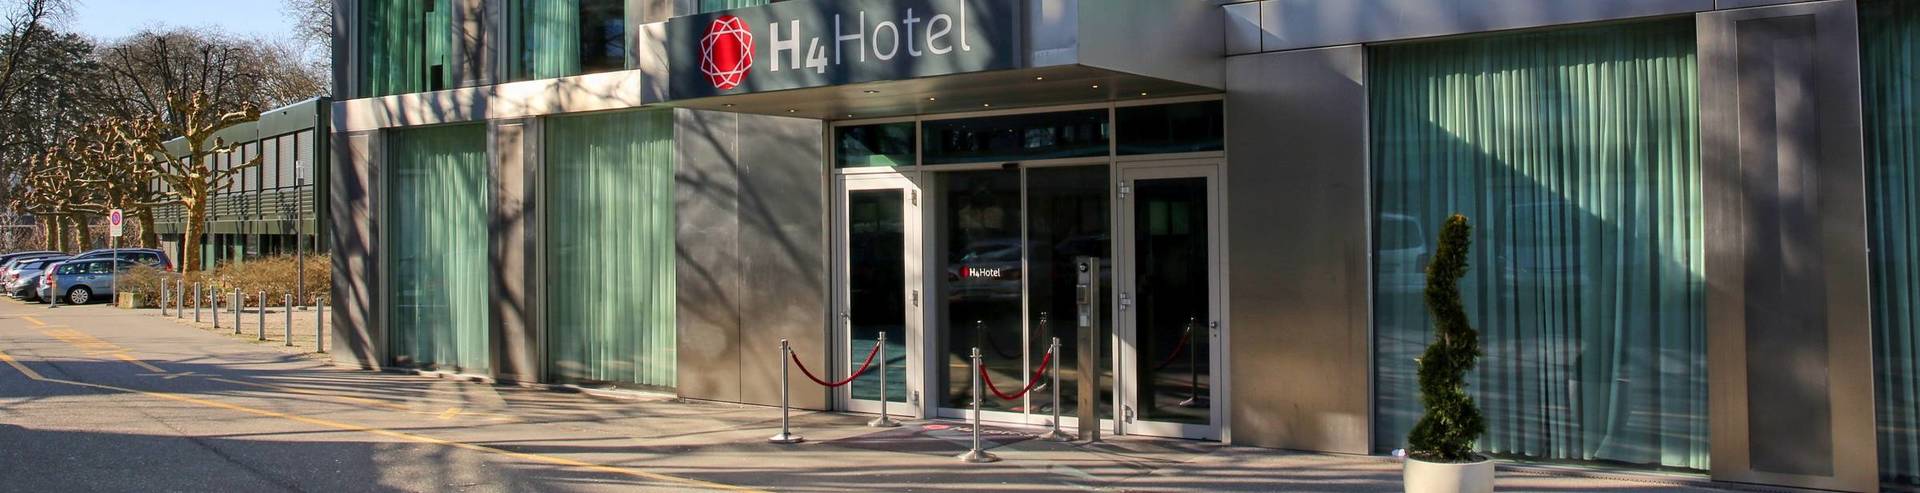 Reviews: H4 Hotel Solothurn - Official website